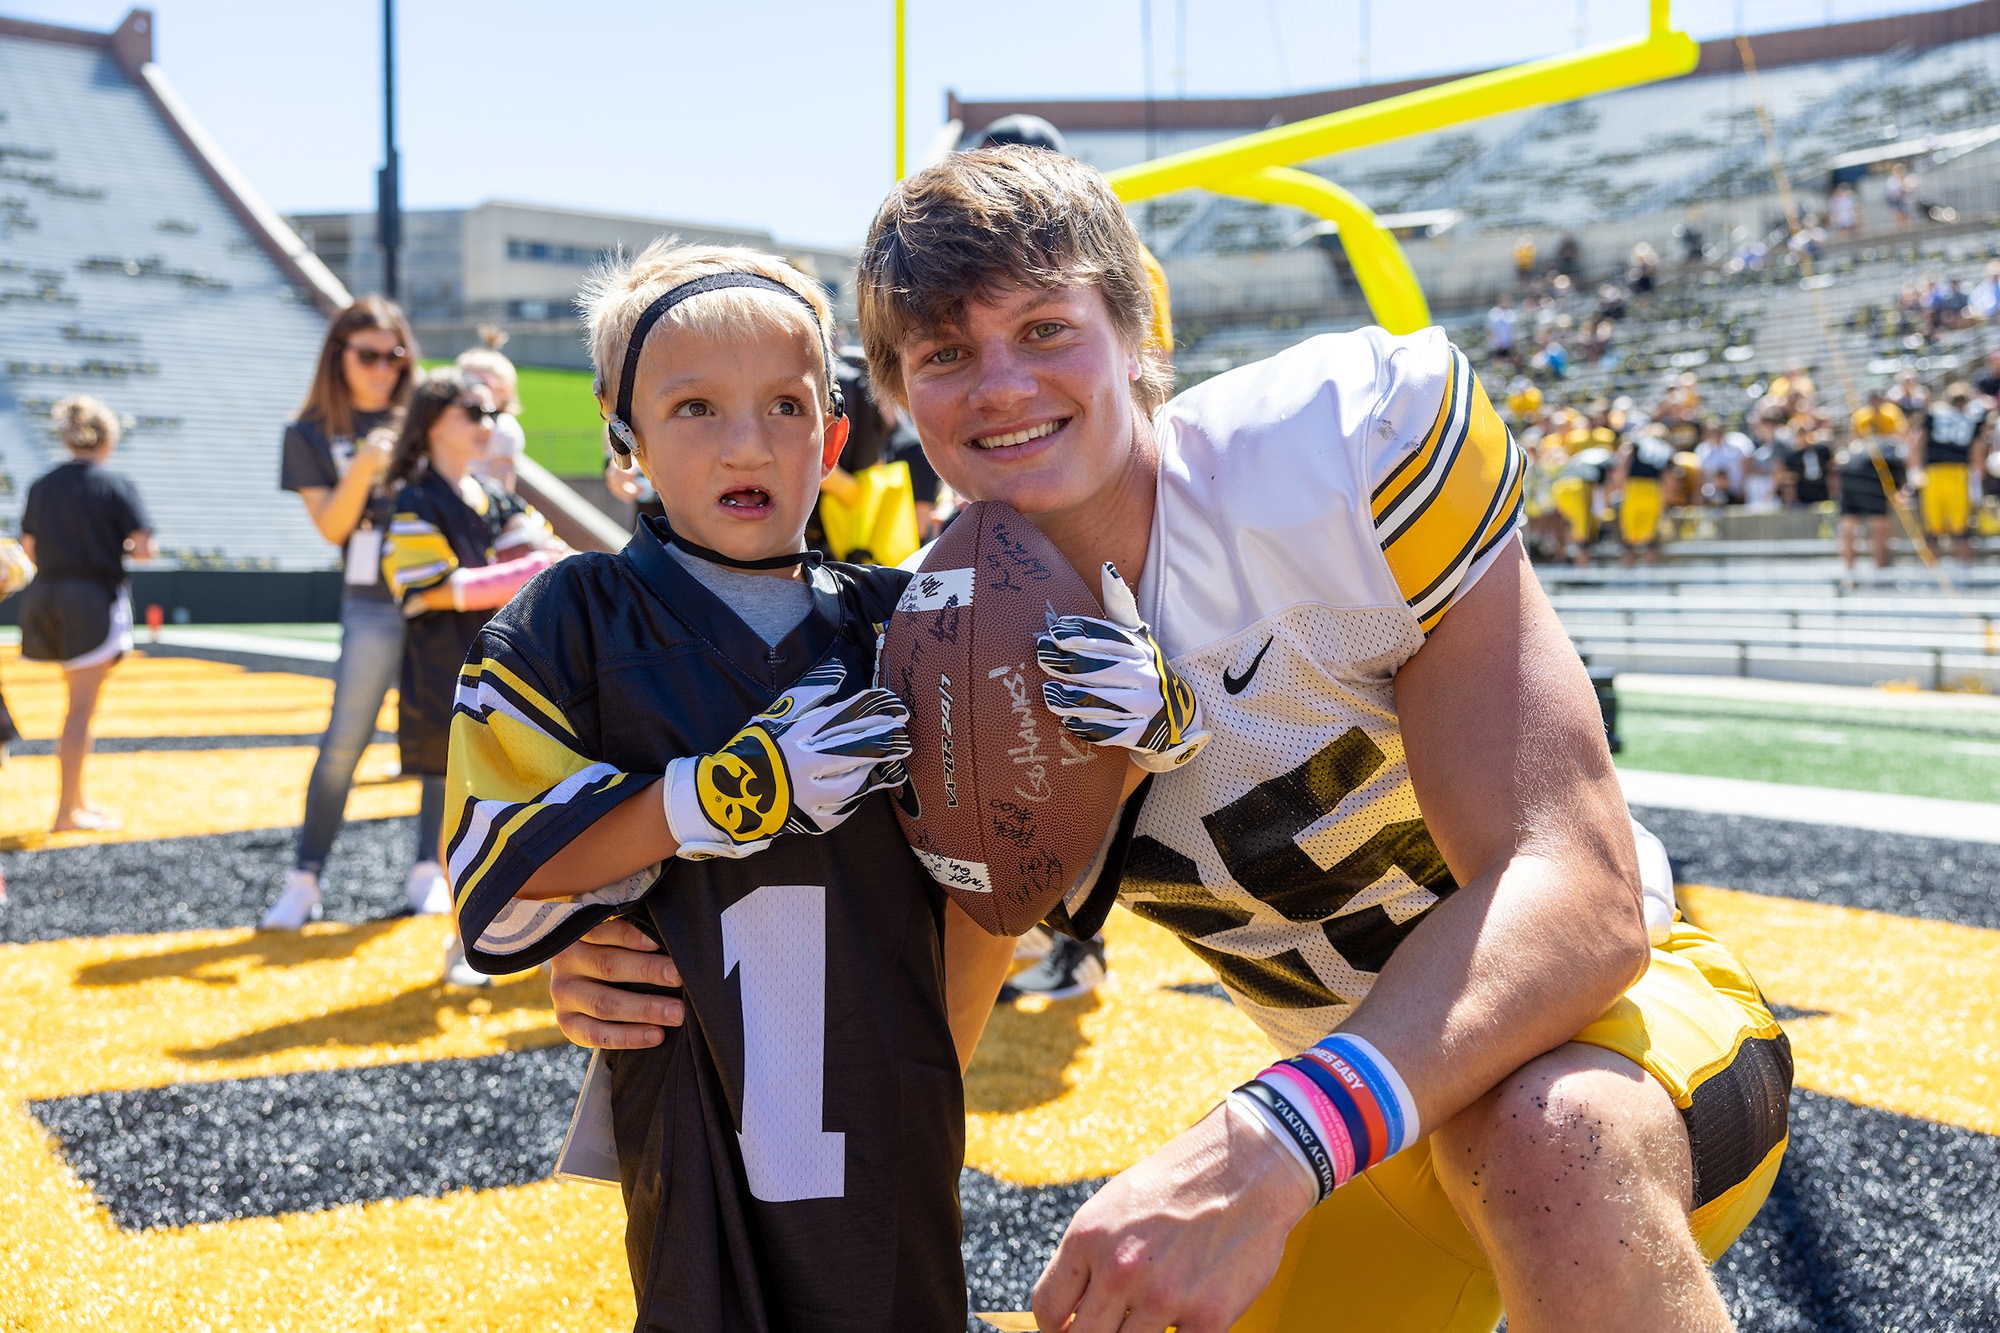 Kid Captain Nile Kron on the field at Kinnick Stadium with current Hawkeye football player and Kid Captain alum Kelby Telander